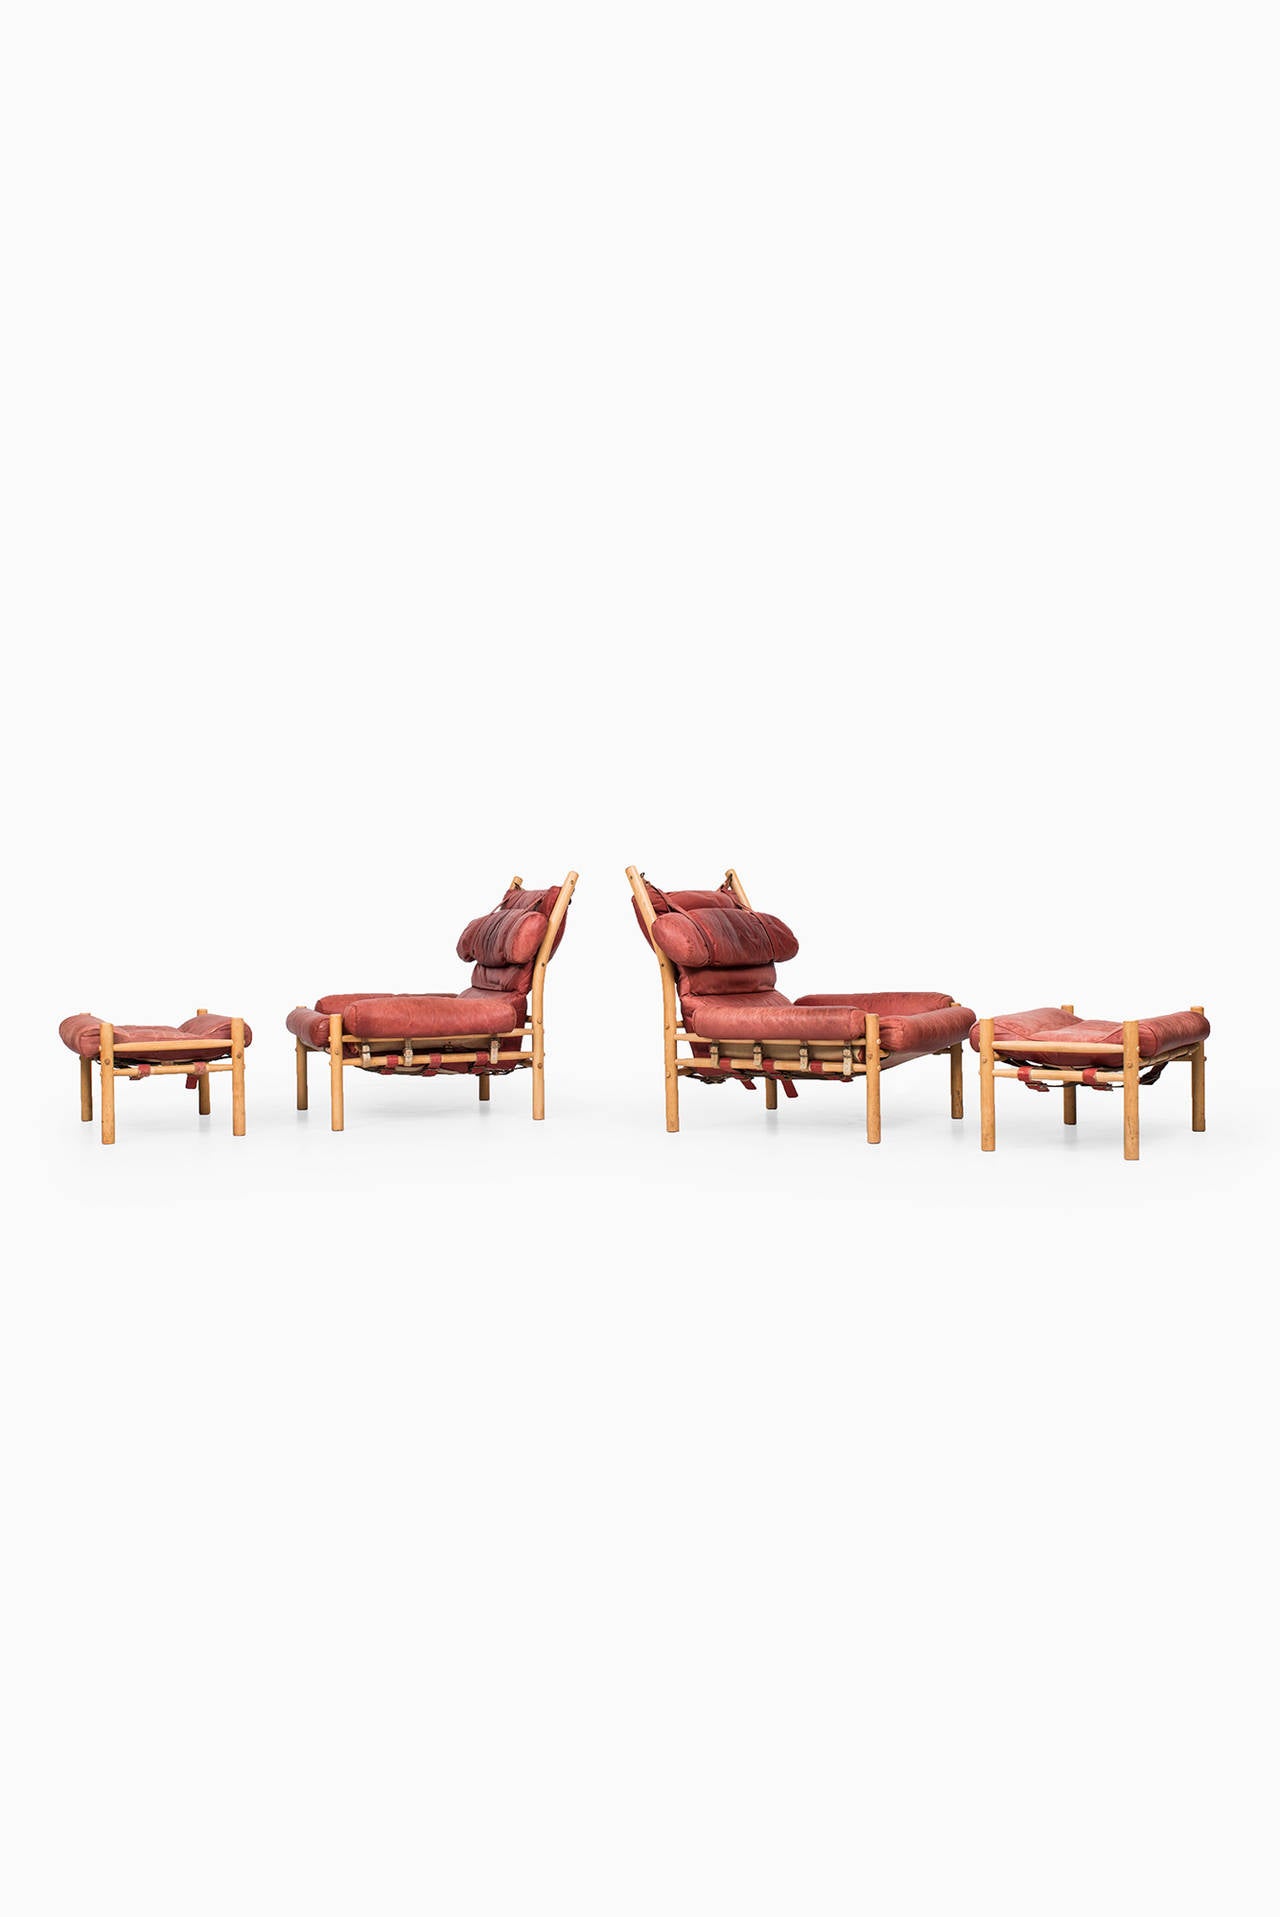 Mid-Century Modern Arne Norell Inca easy chairs with stools produced by Arne Norell in Sweden